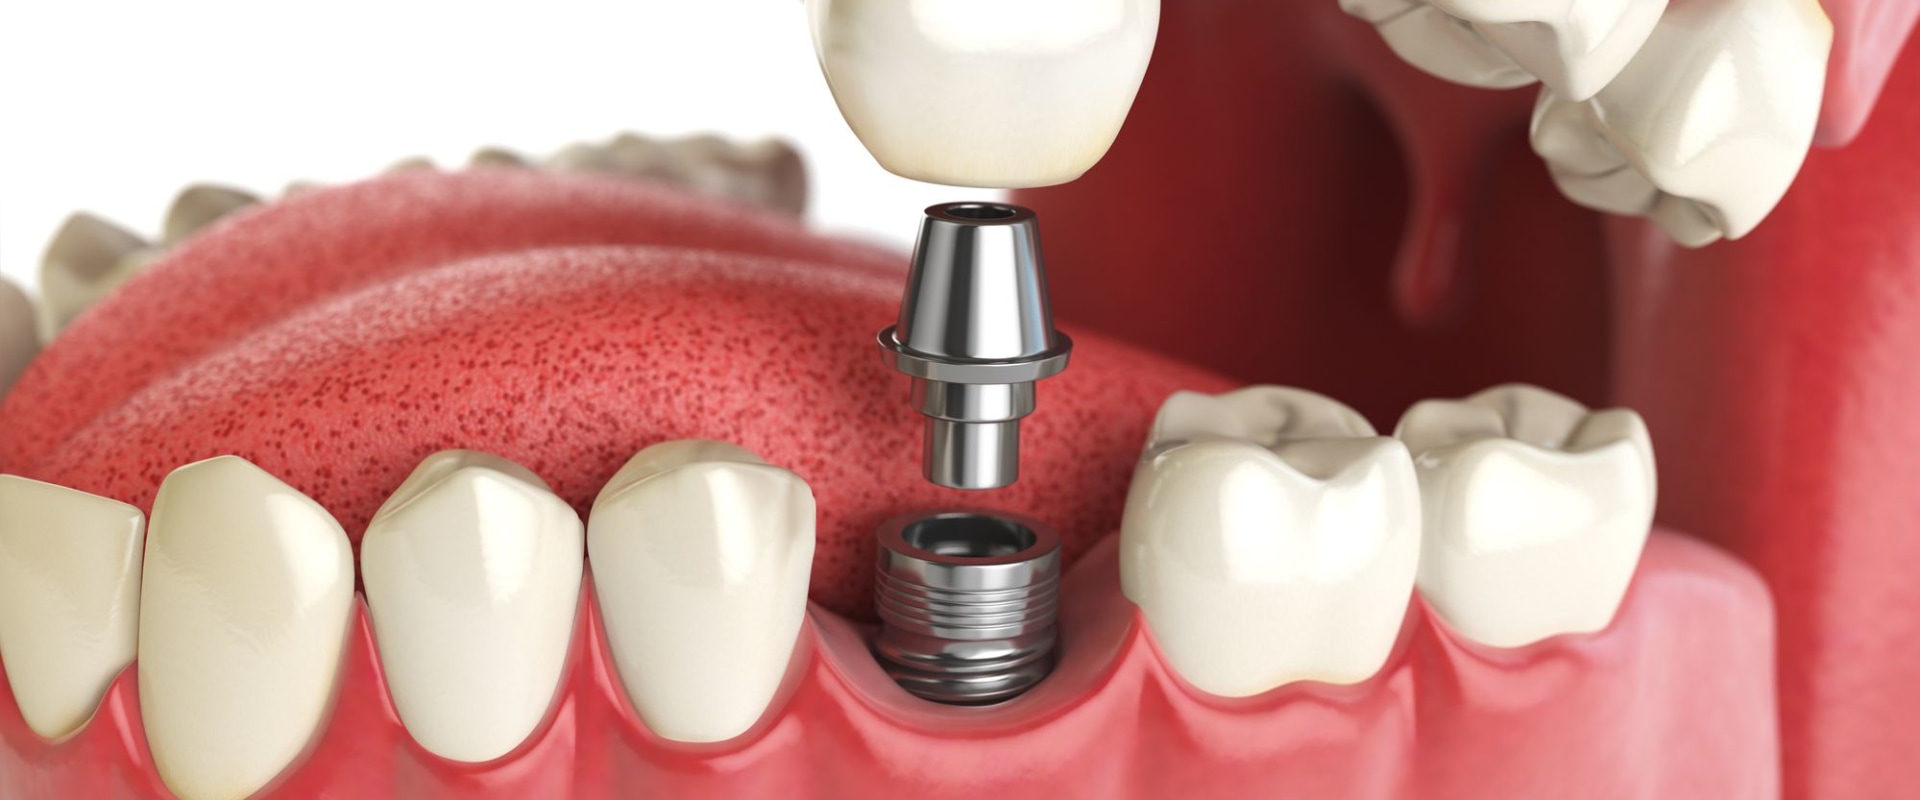 Which is the best type of dental implants?